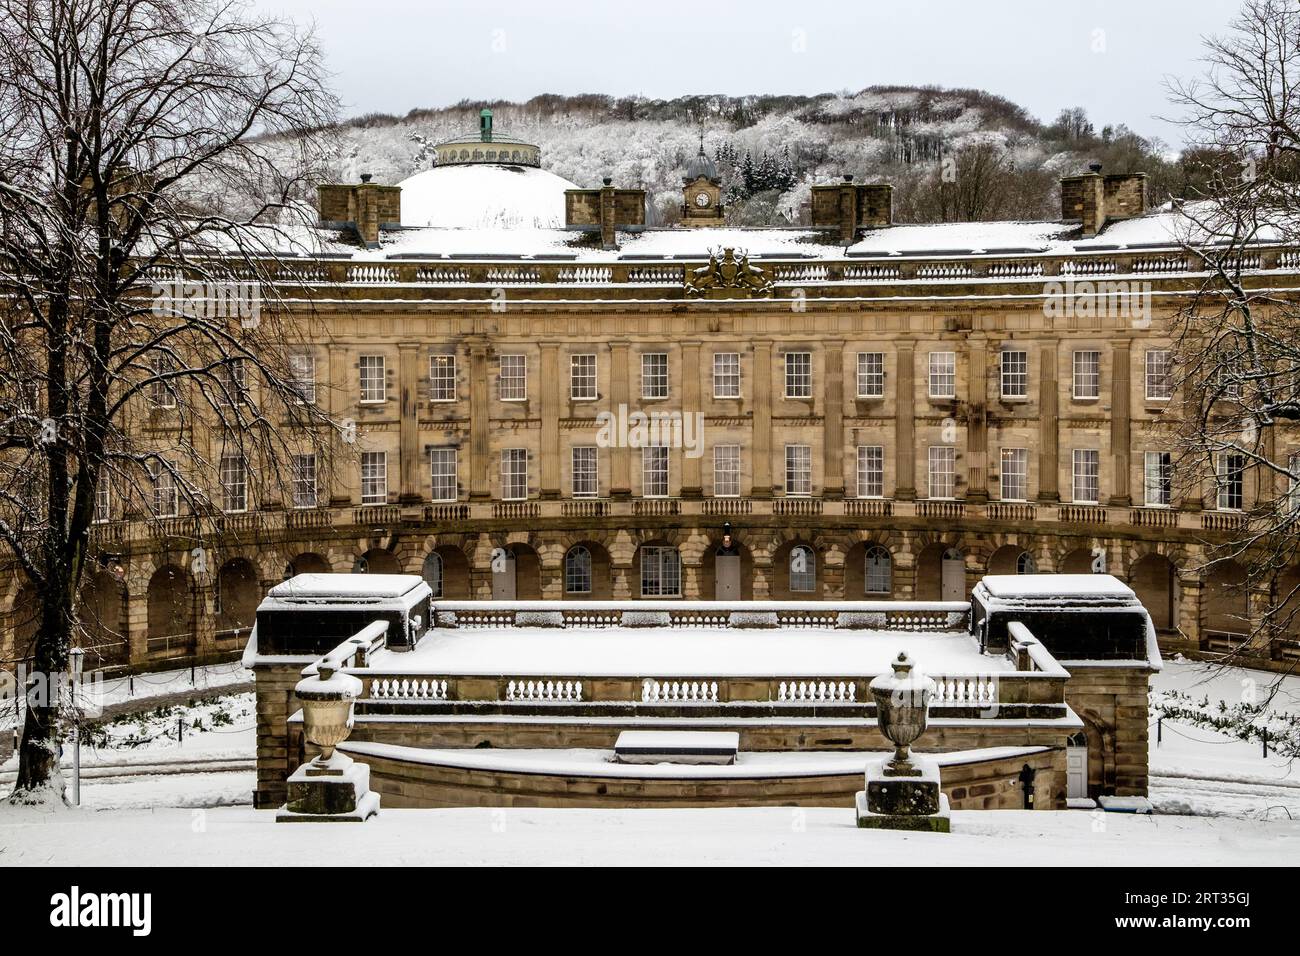 The Crescent - now a hotel - in The centre of Buxton in Derbyshire under a covering of winter snow Stock Photo